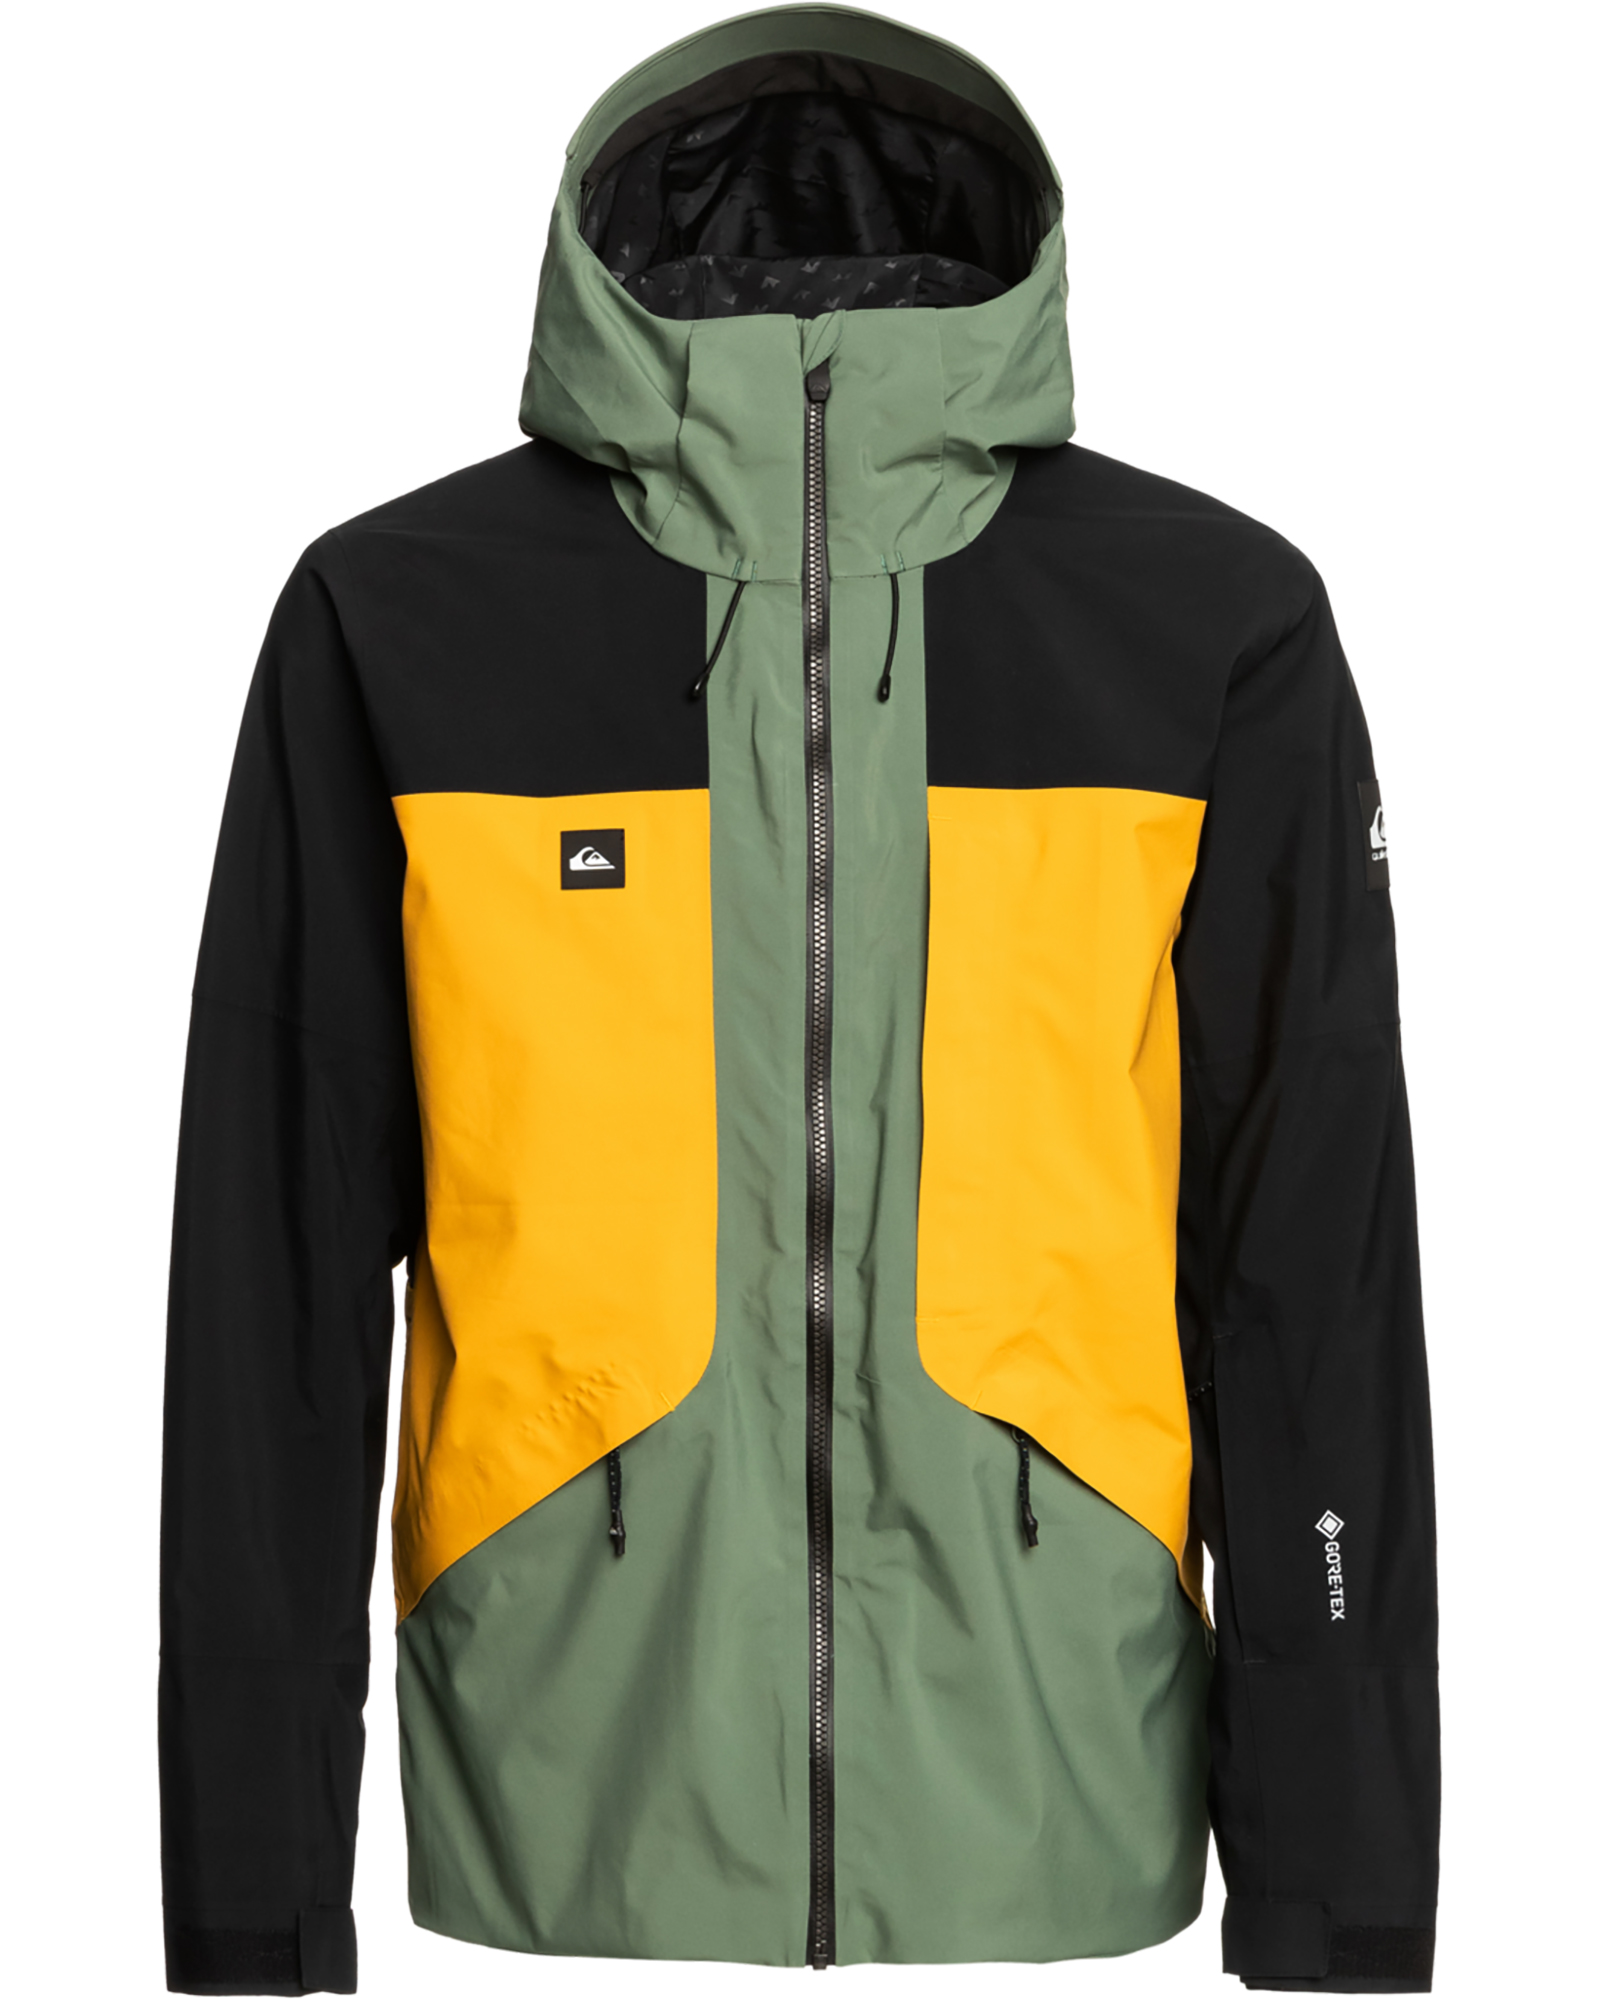 Quiksilver Forever Stretch GORE TEX Insulated Men’s Jacket - Laurel Wreath/Mineral Yellow/Black L